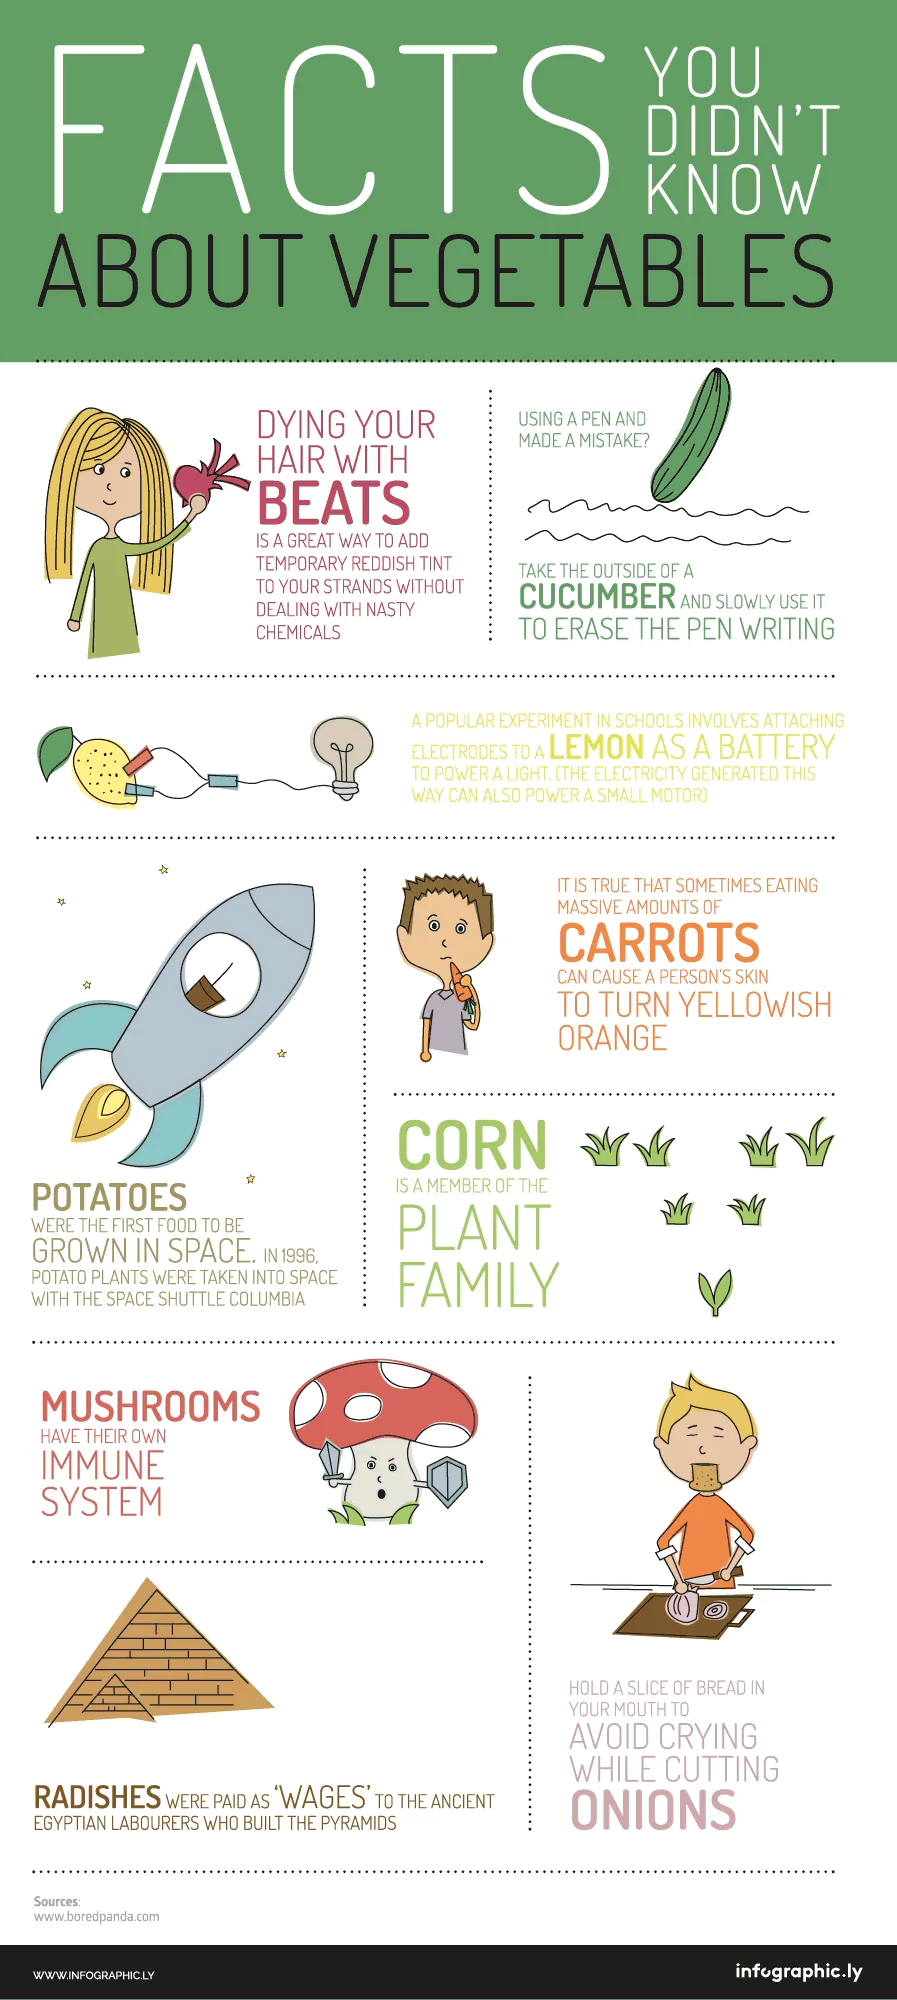 Facts About Vegetables